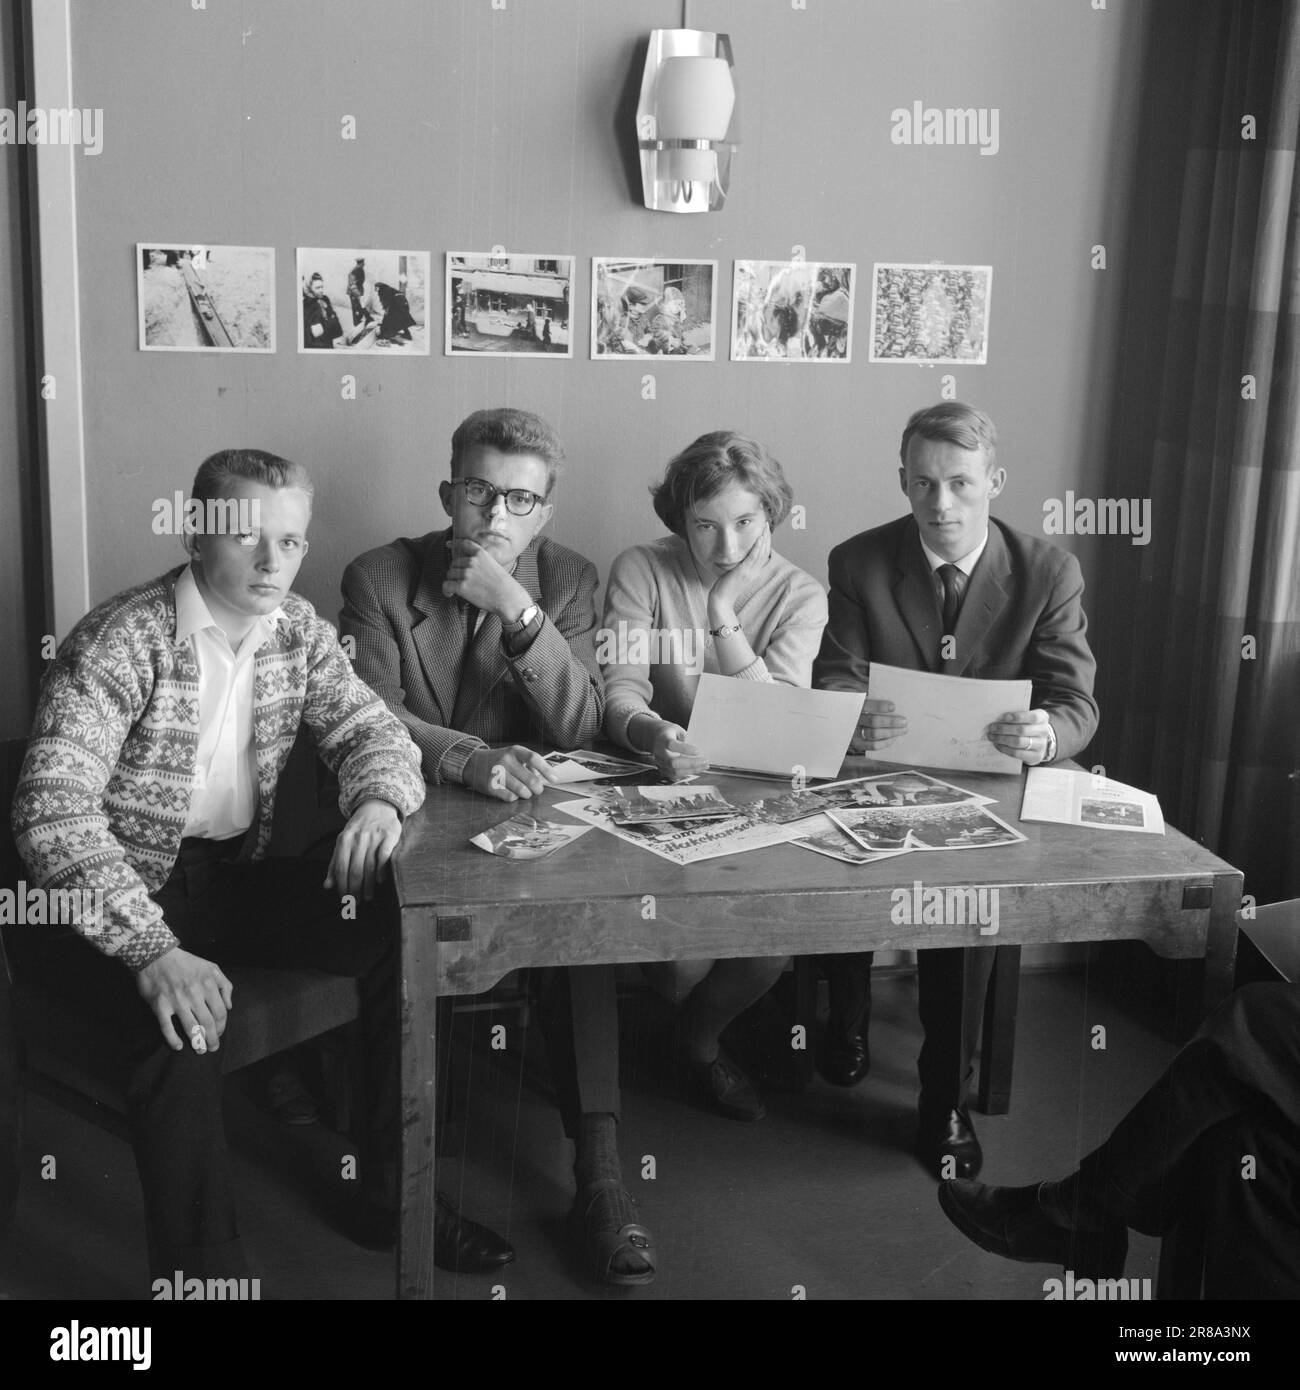 Actual 44-2-1960: We did not know this Three high school students, Lars Bleken (18), Tore Bergseng (18), and Anne-Lise Kristiansen (17), have gathered for reflection after the screening of 'The truth about the swastika', the documentary film about the rise and fall of the Hitler regime, compiled from clips from film newspapers and German film archives. Together with the three high school students, there is also Ole Herman Ramberg, a teacher's school student (28), but with a good deal of military service behind him and the only one in the company who has personal memories of the war and the Ger Stock Photo